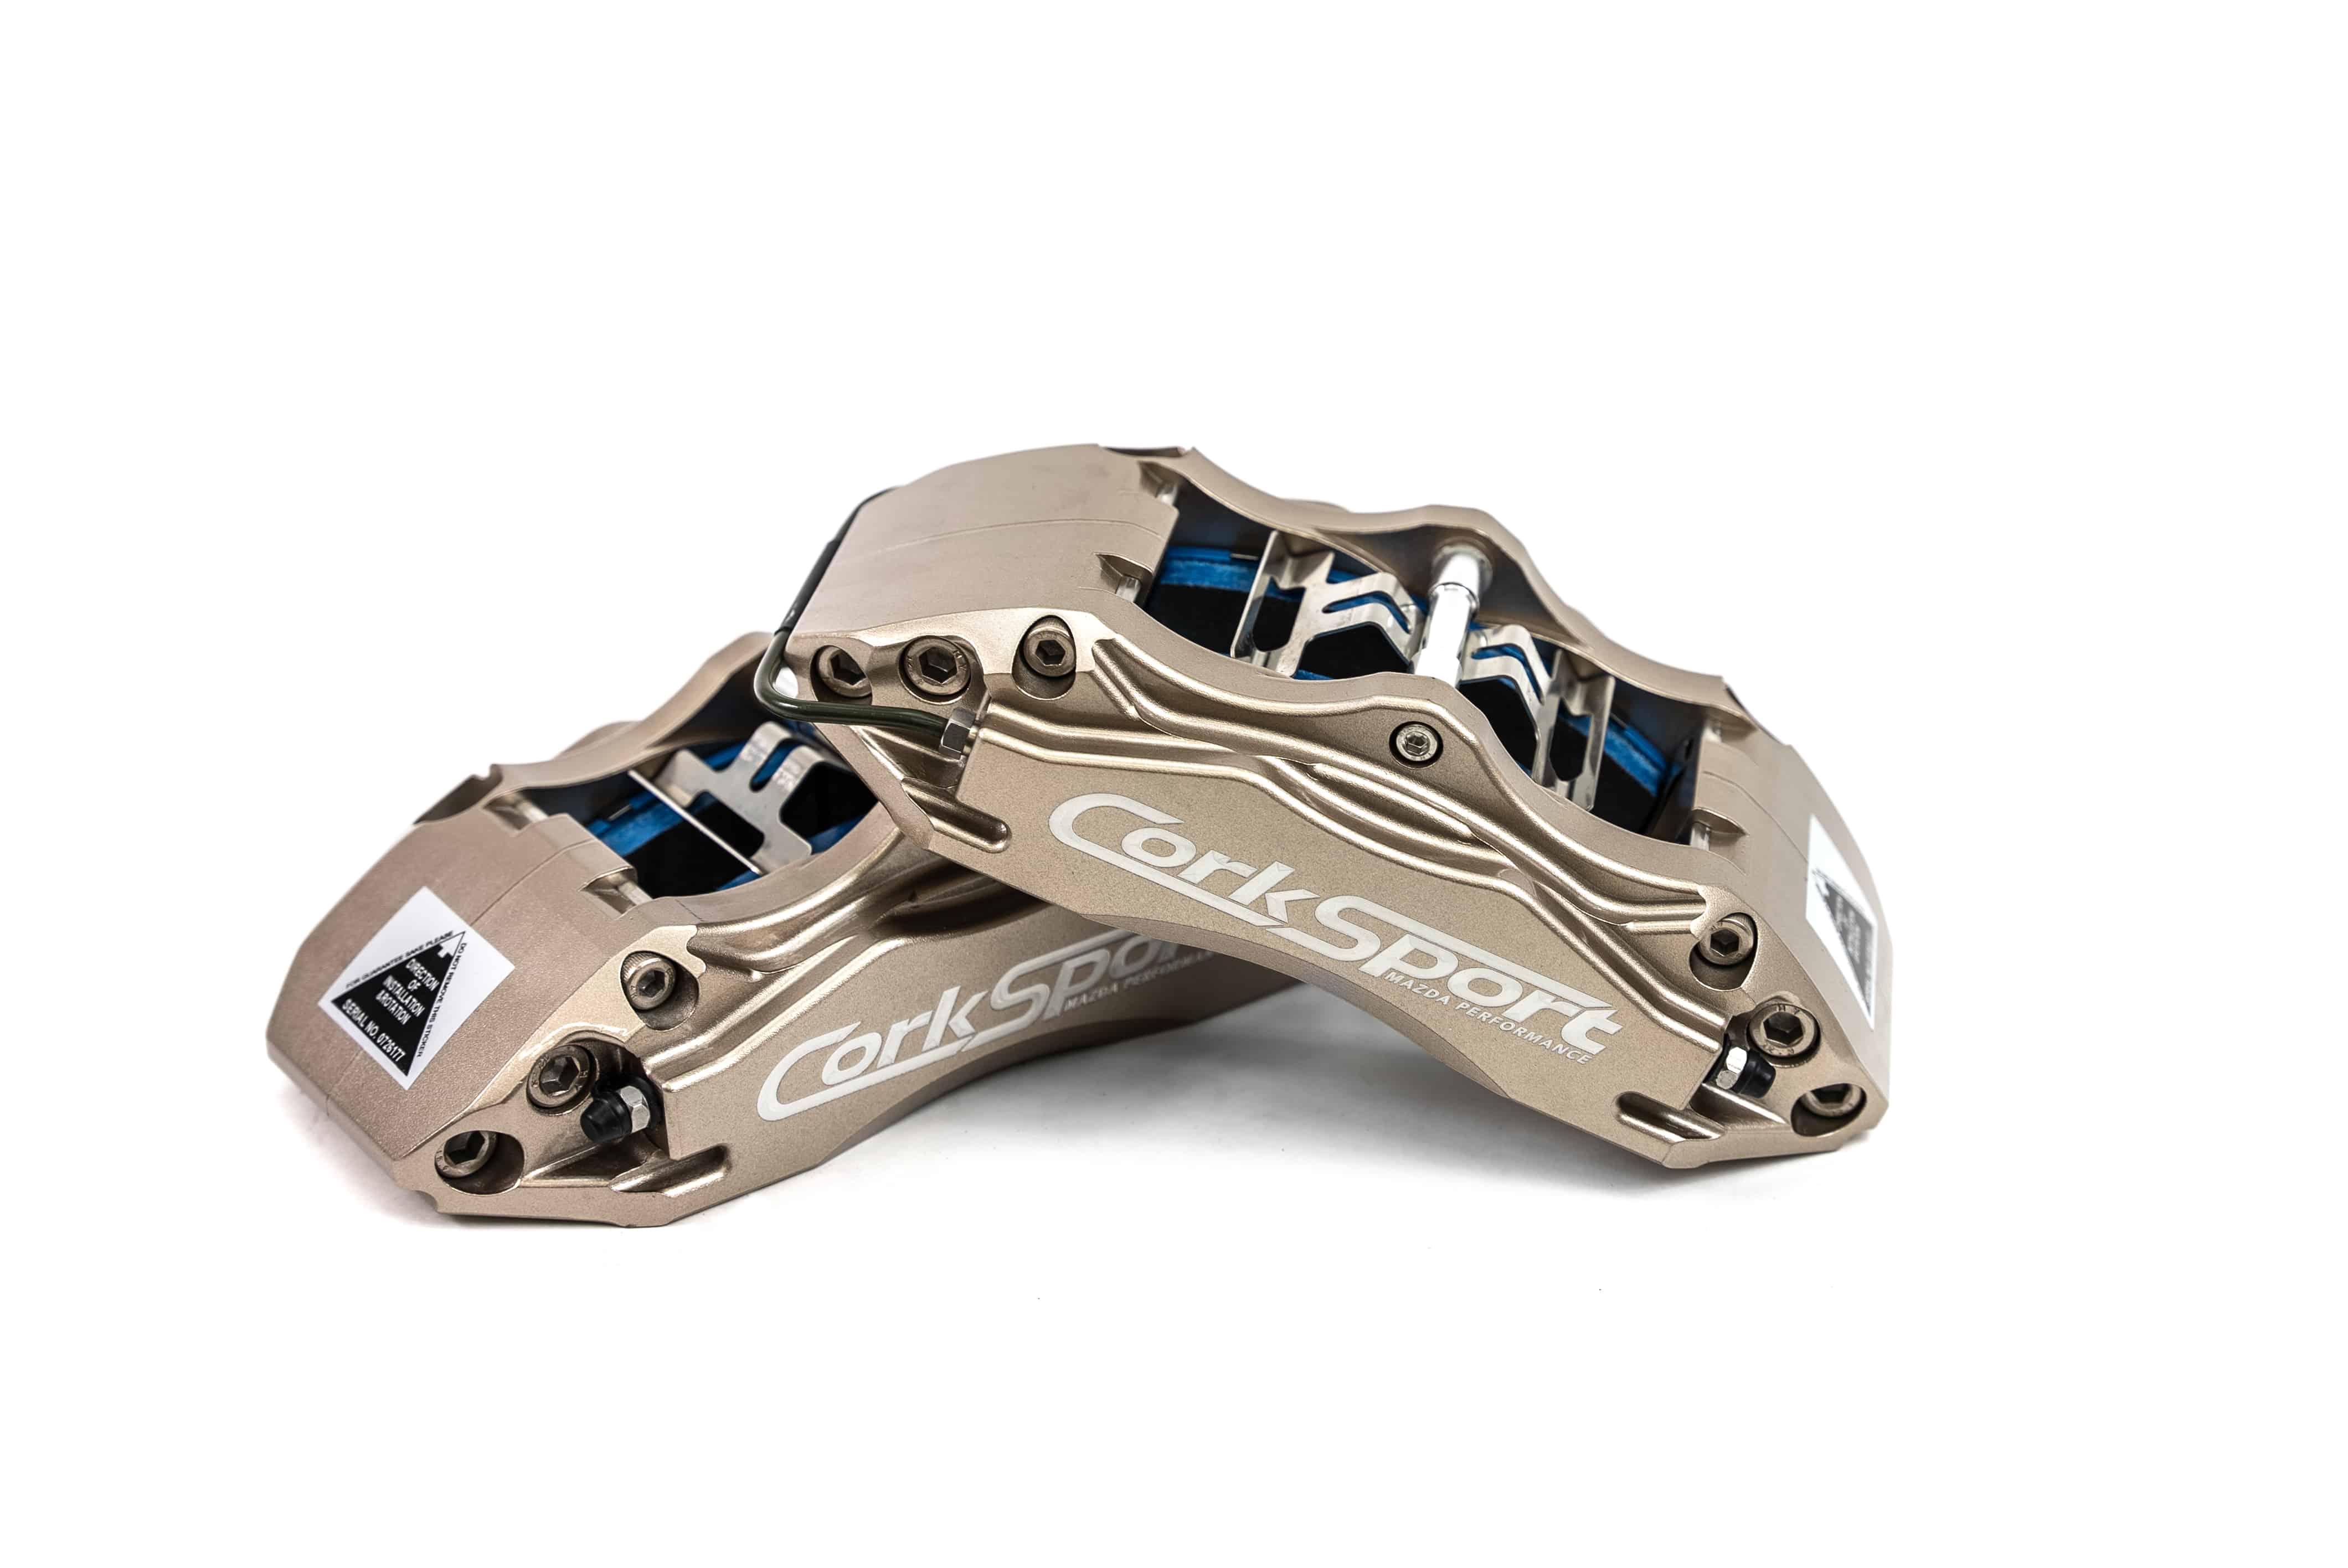 Titanium calipers add a level of class with your performance BBK